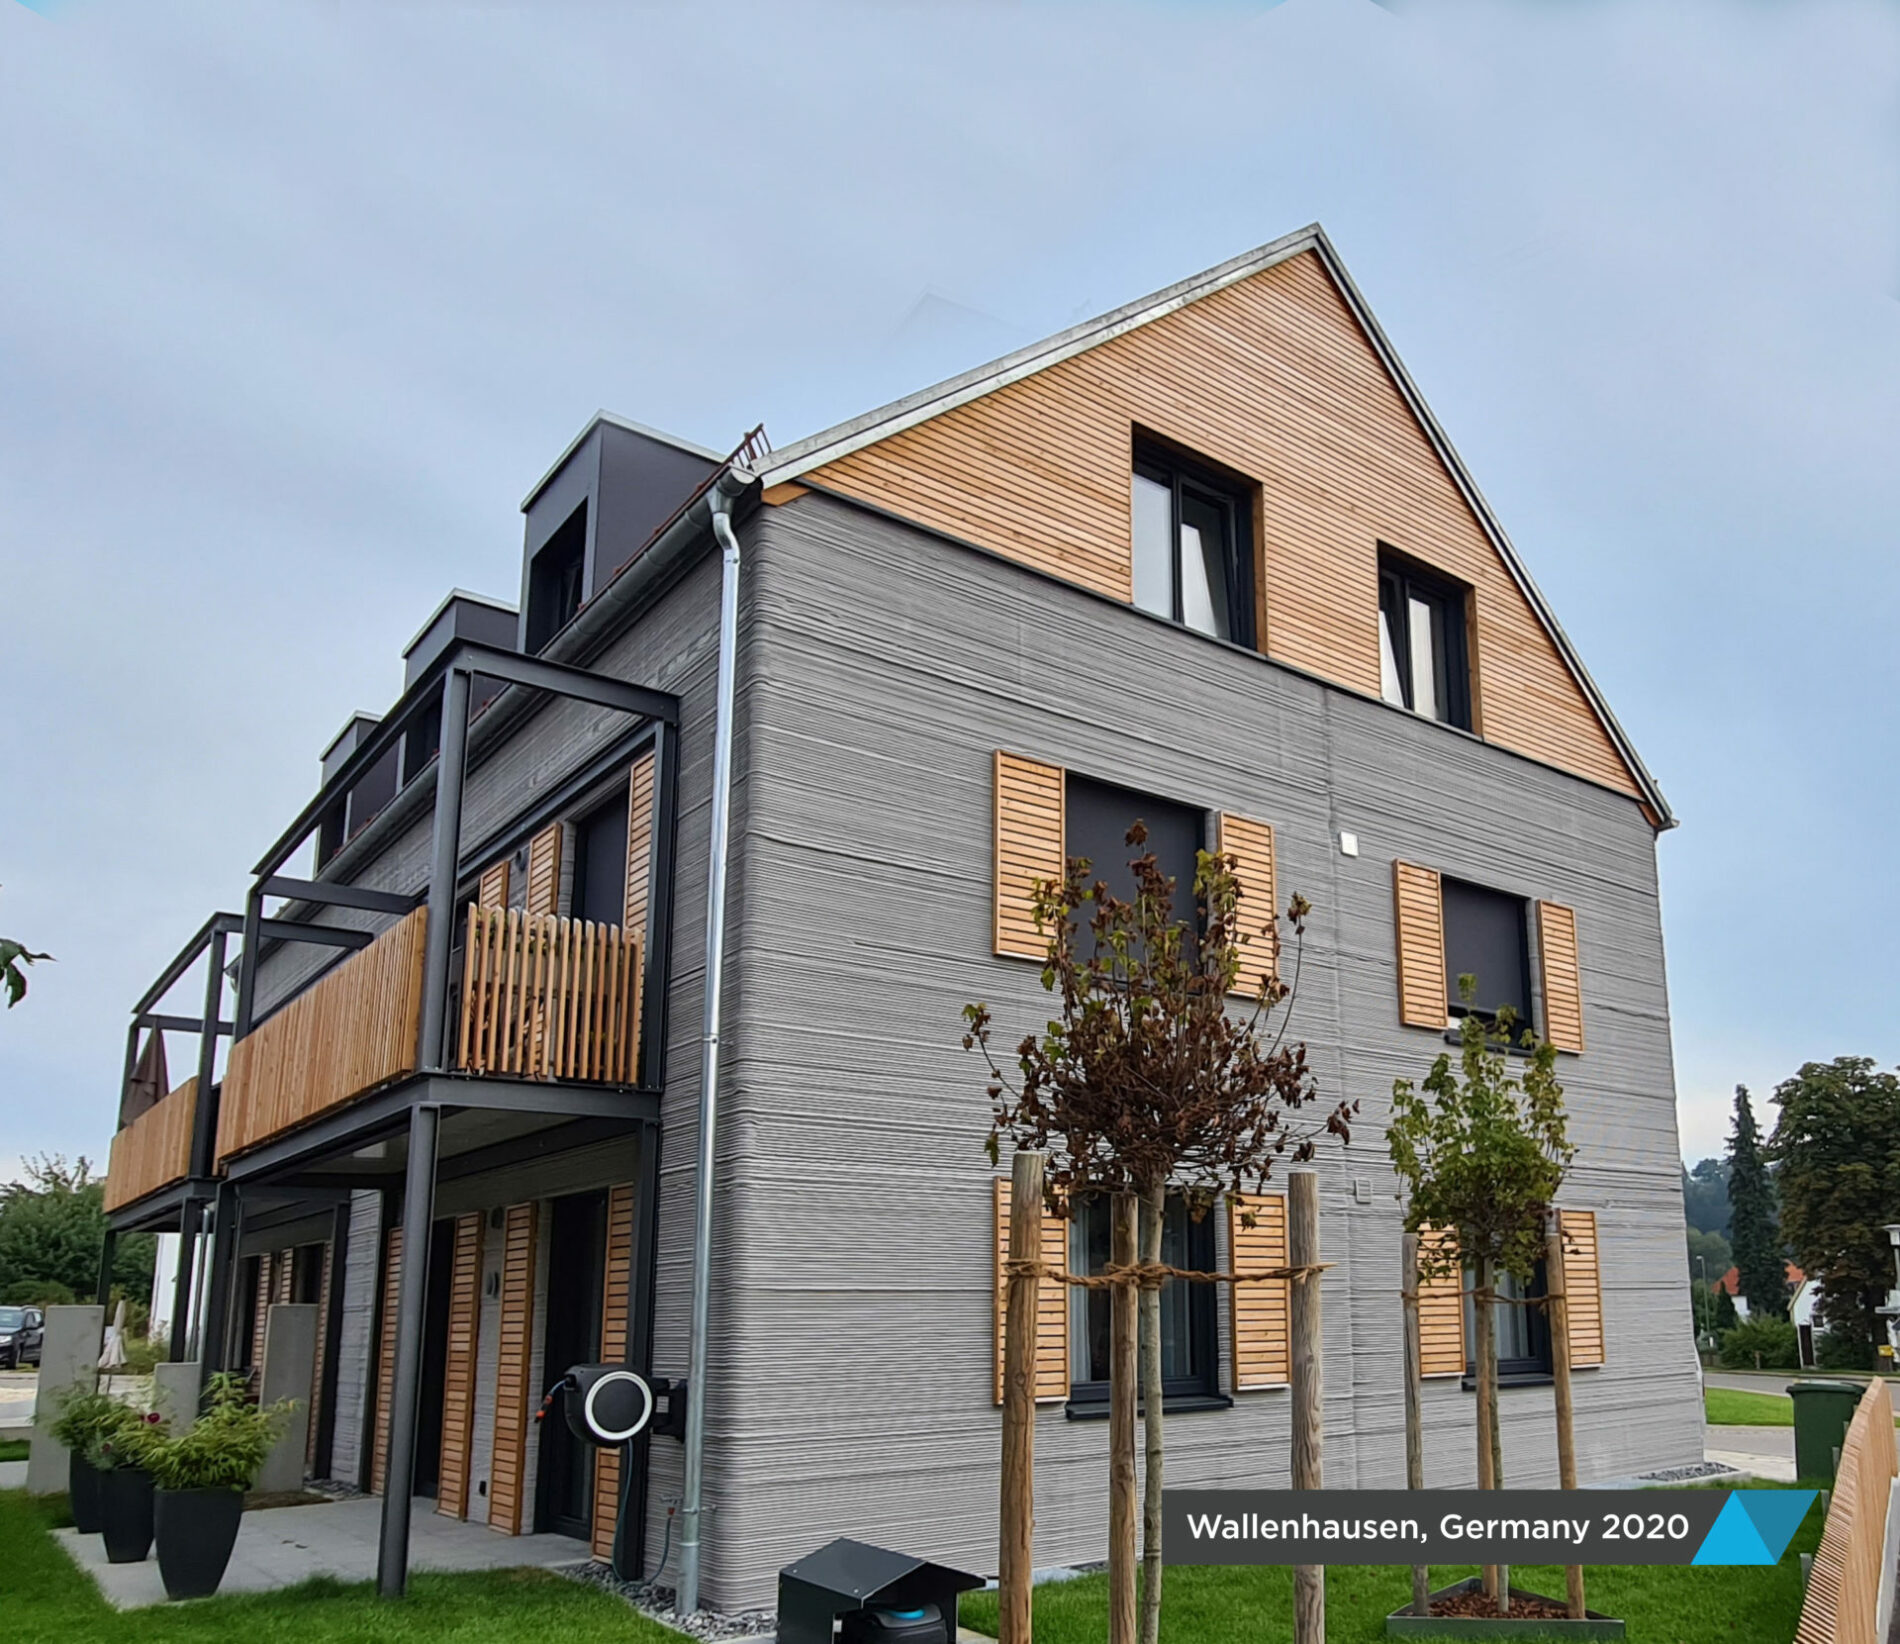 PERI – Wallenhausen, Germany – Completed by Peri Group 2021. Currently the world’s largest 3DCP residential structure in Europe. 21-day print time to completion of load-bearing and non-load-bearing walls.